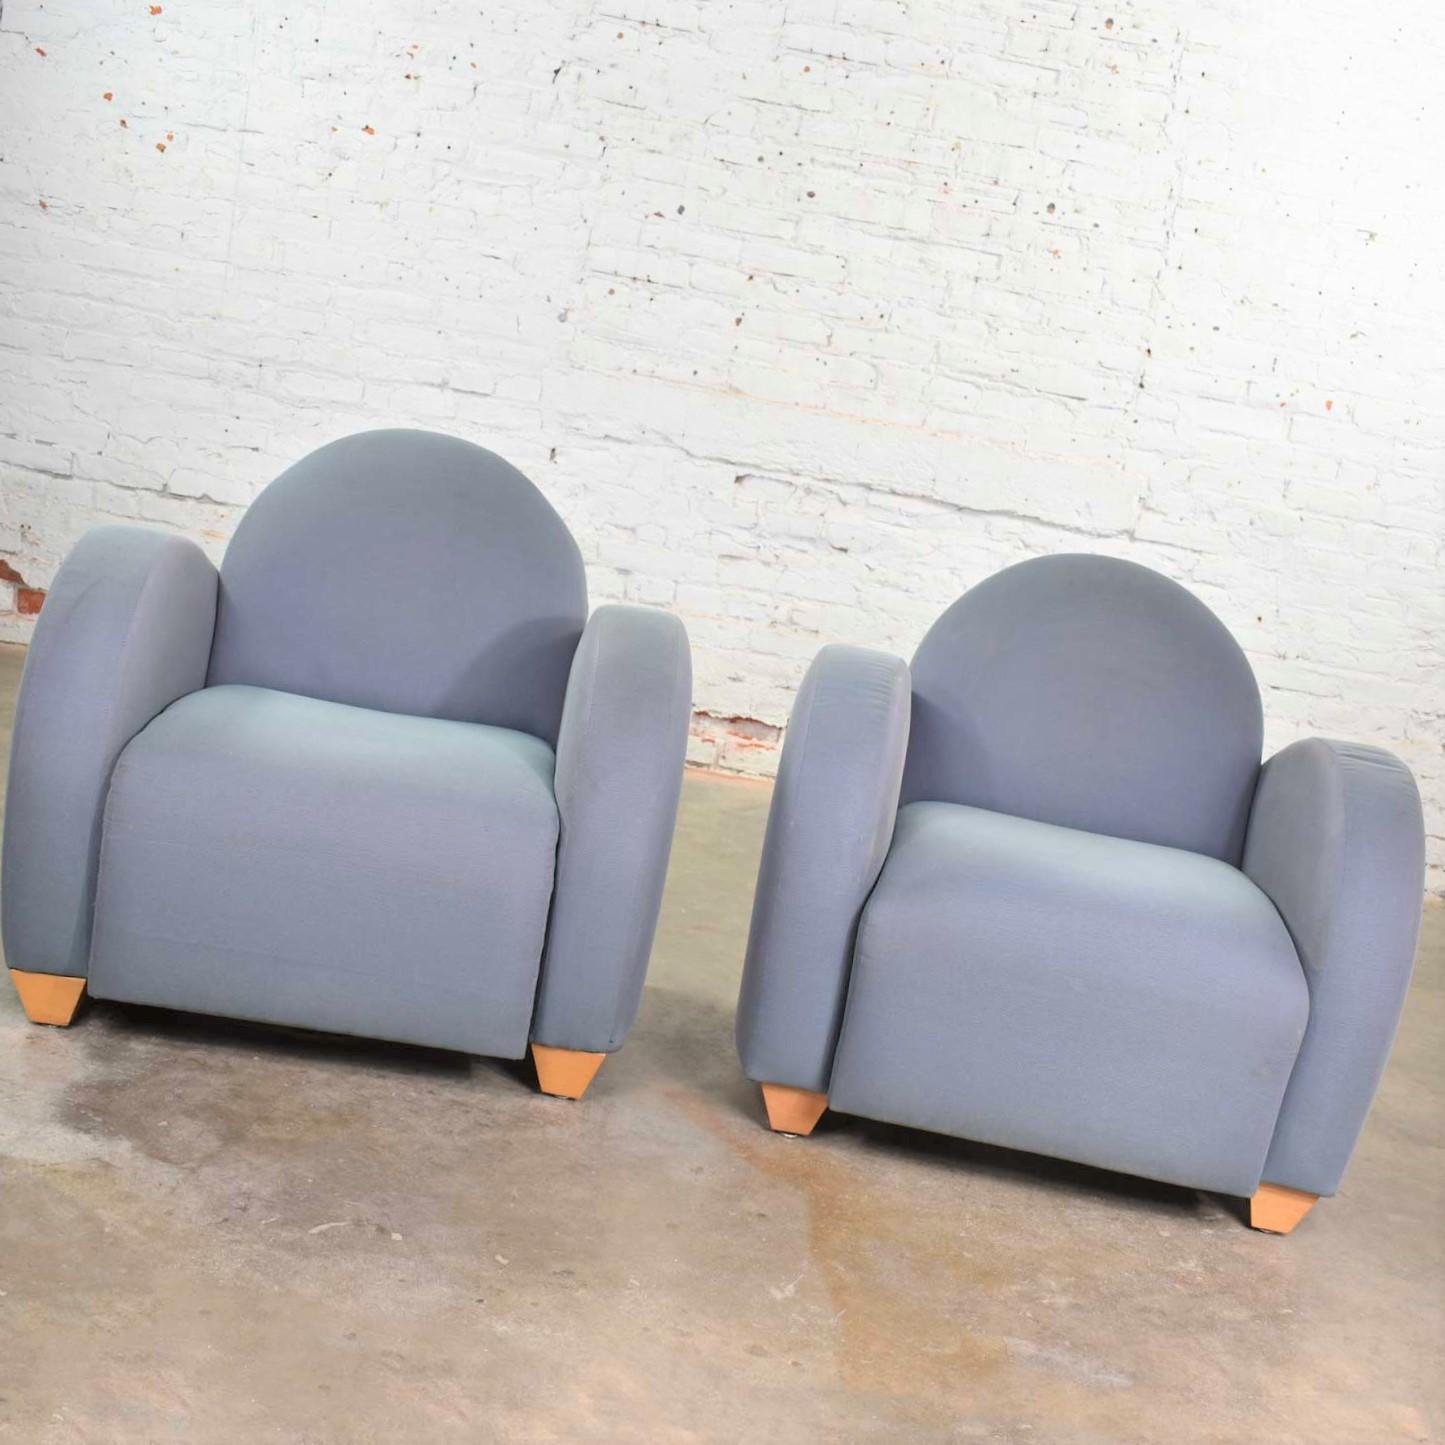 We are offering here a large number of Michael Graves designed postmodern club chairs or lounge chairs produced by David Edward Company. We have priced these chairs individually, but you may purchase multiples. There are currently 12 chairs. They